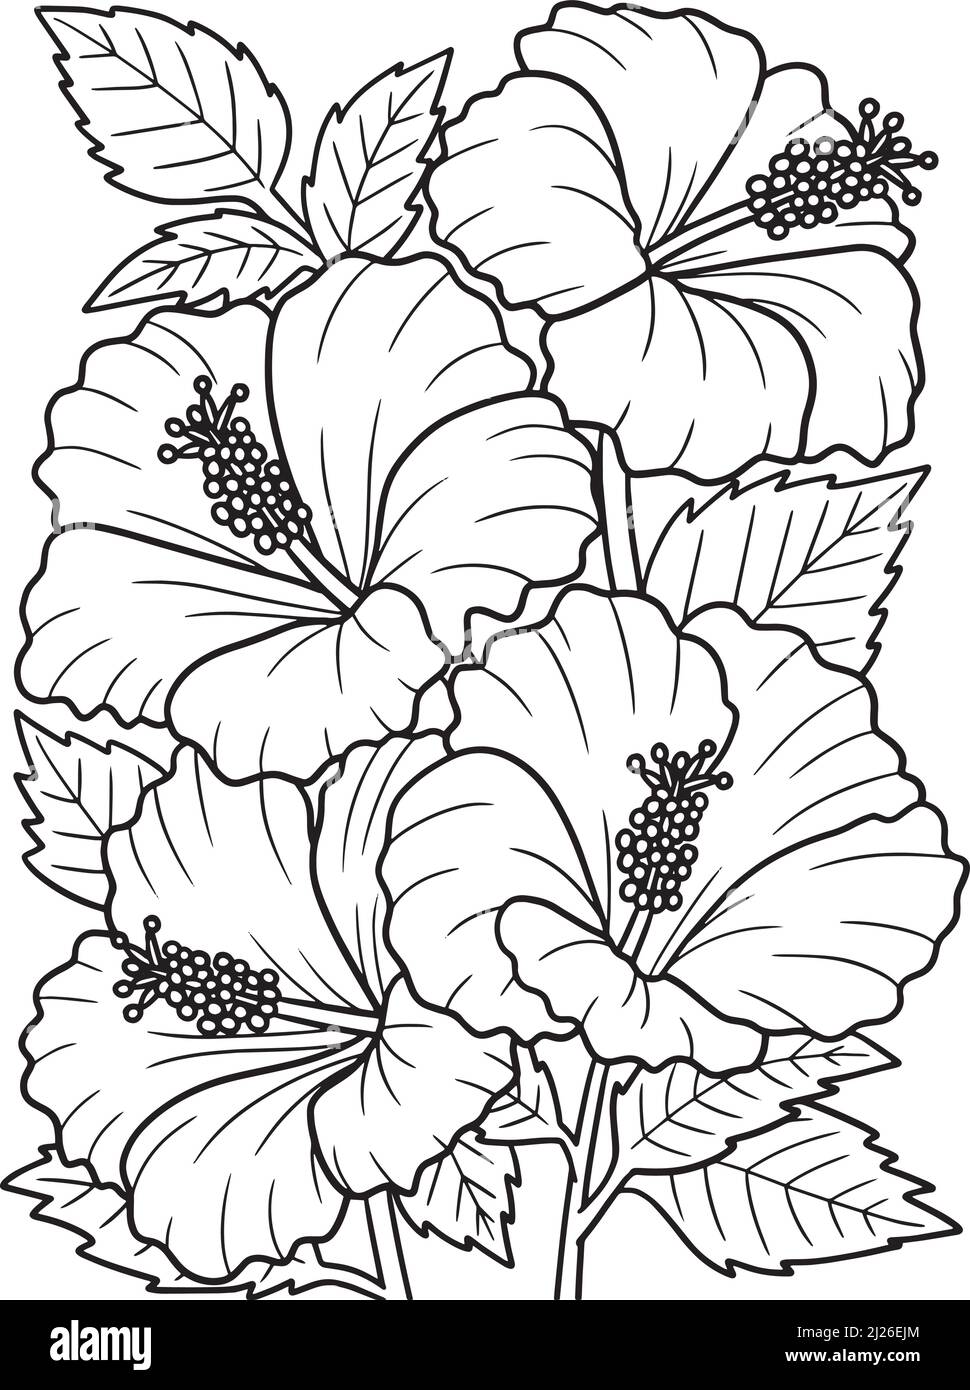 Hibiscus flower coloring page for adults stock vector image art